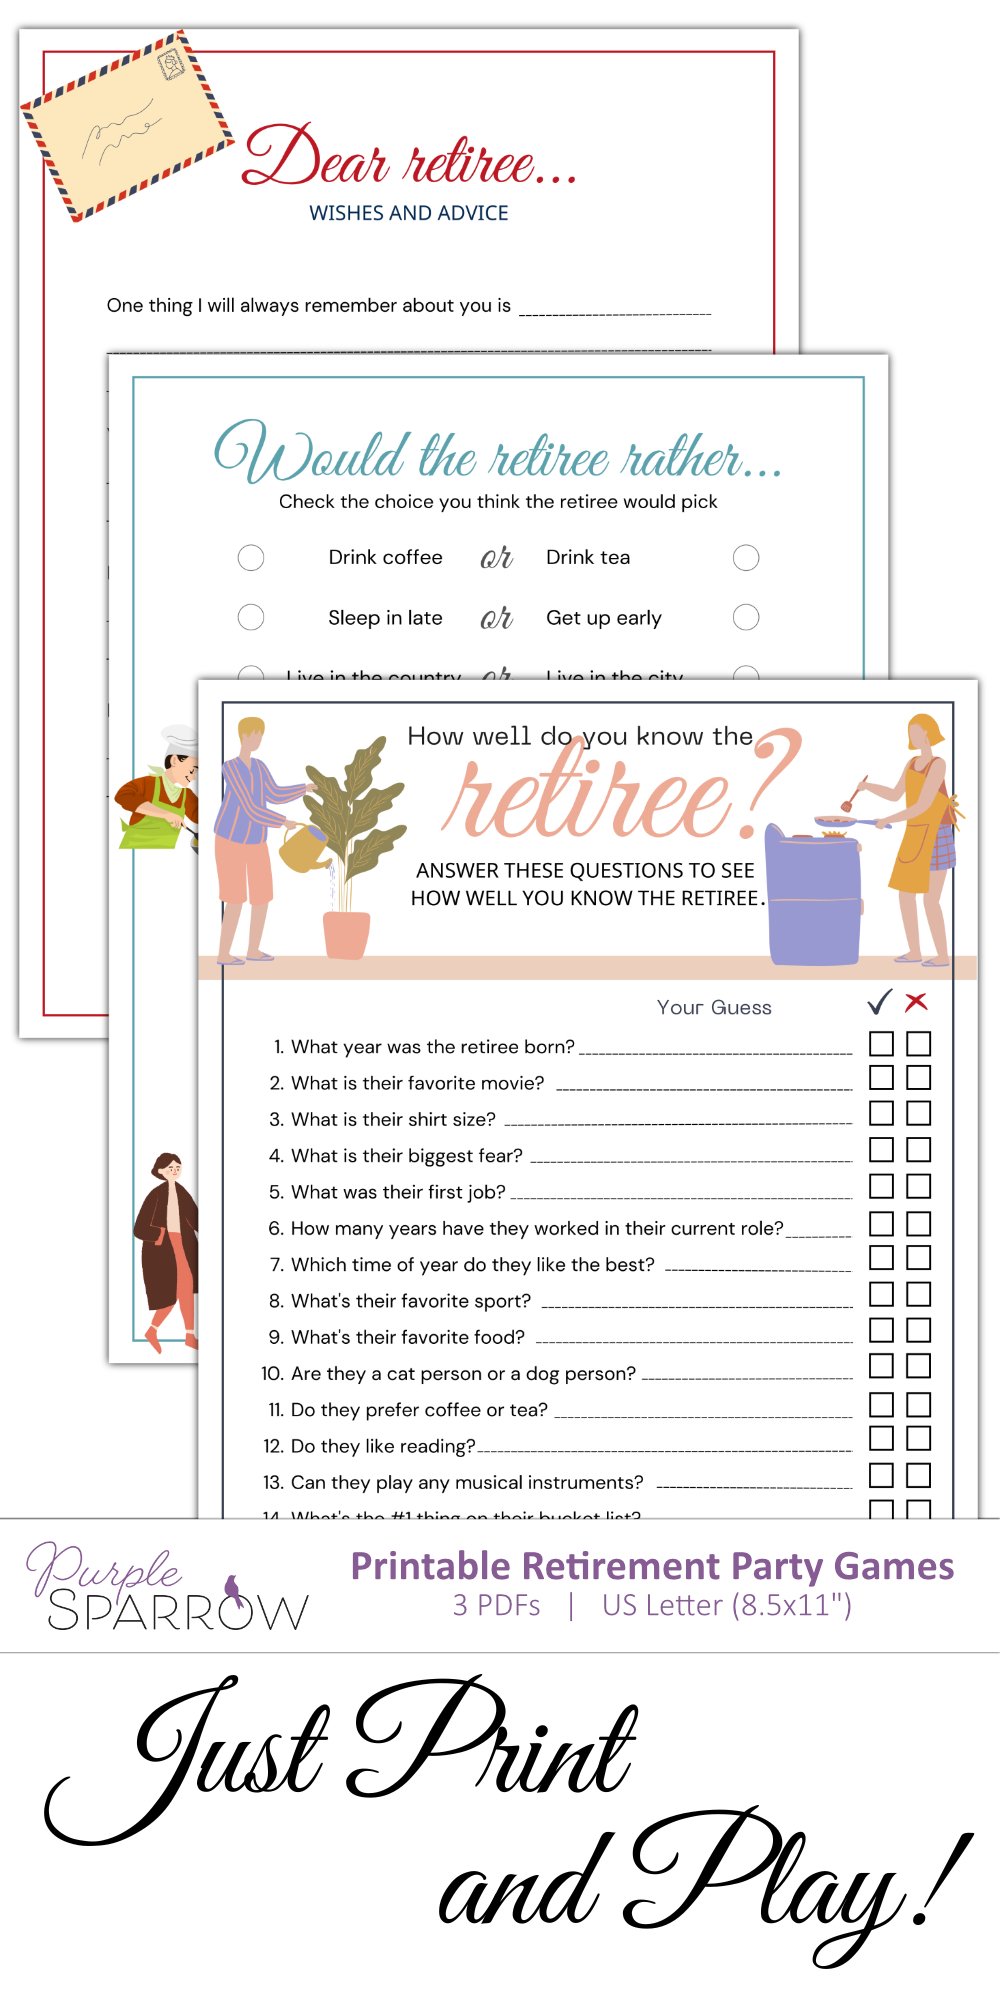 Retirement party games printable pdfs us letter